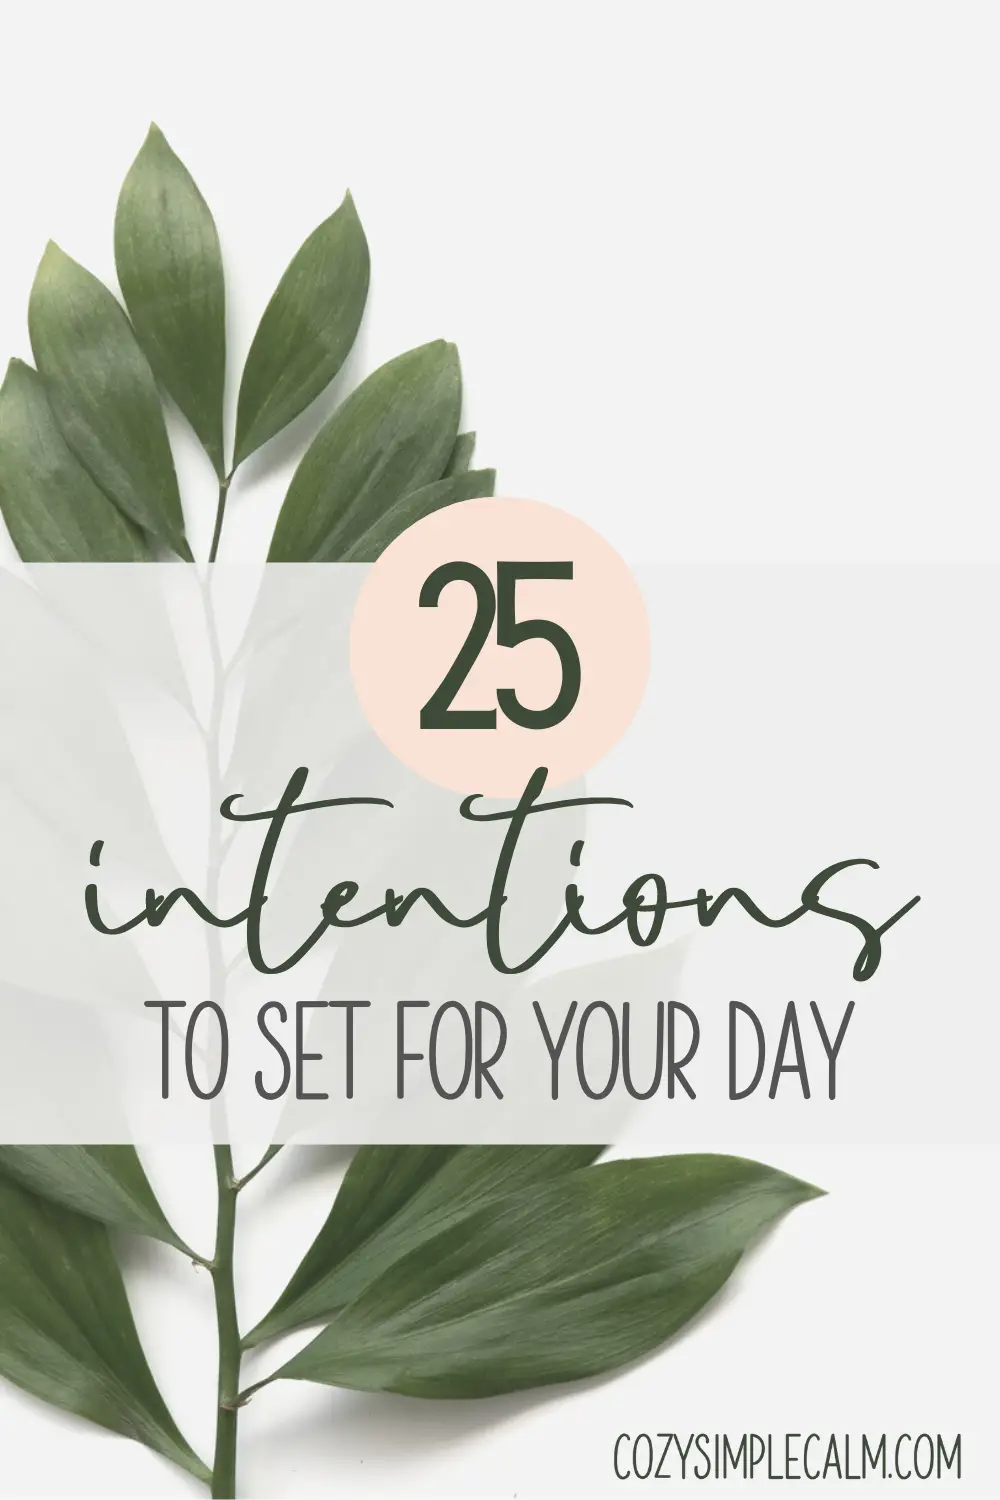 Palm leaf on white background - Text overlay: 25 intentions to set for your day